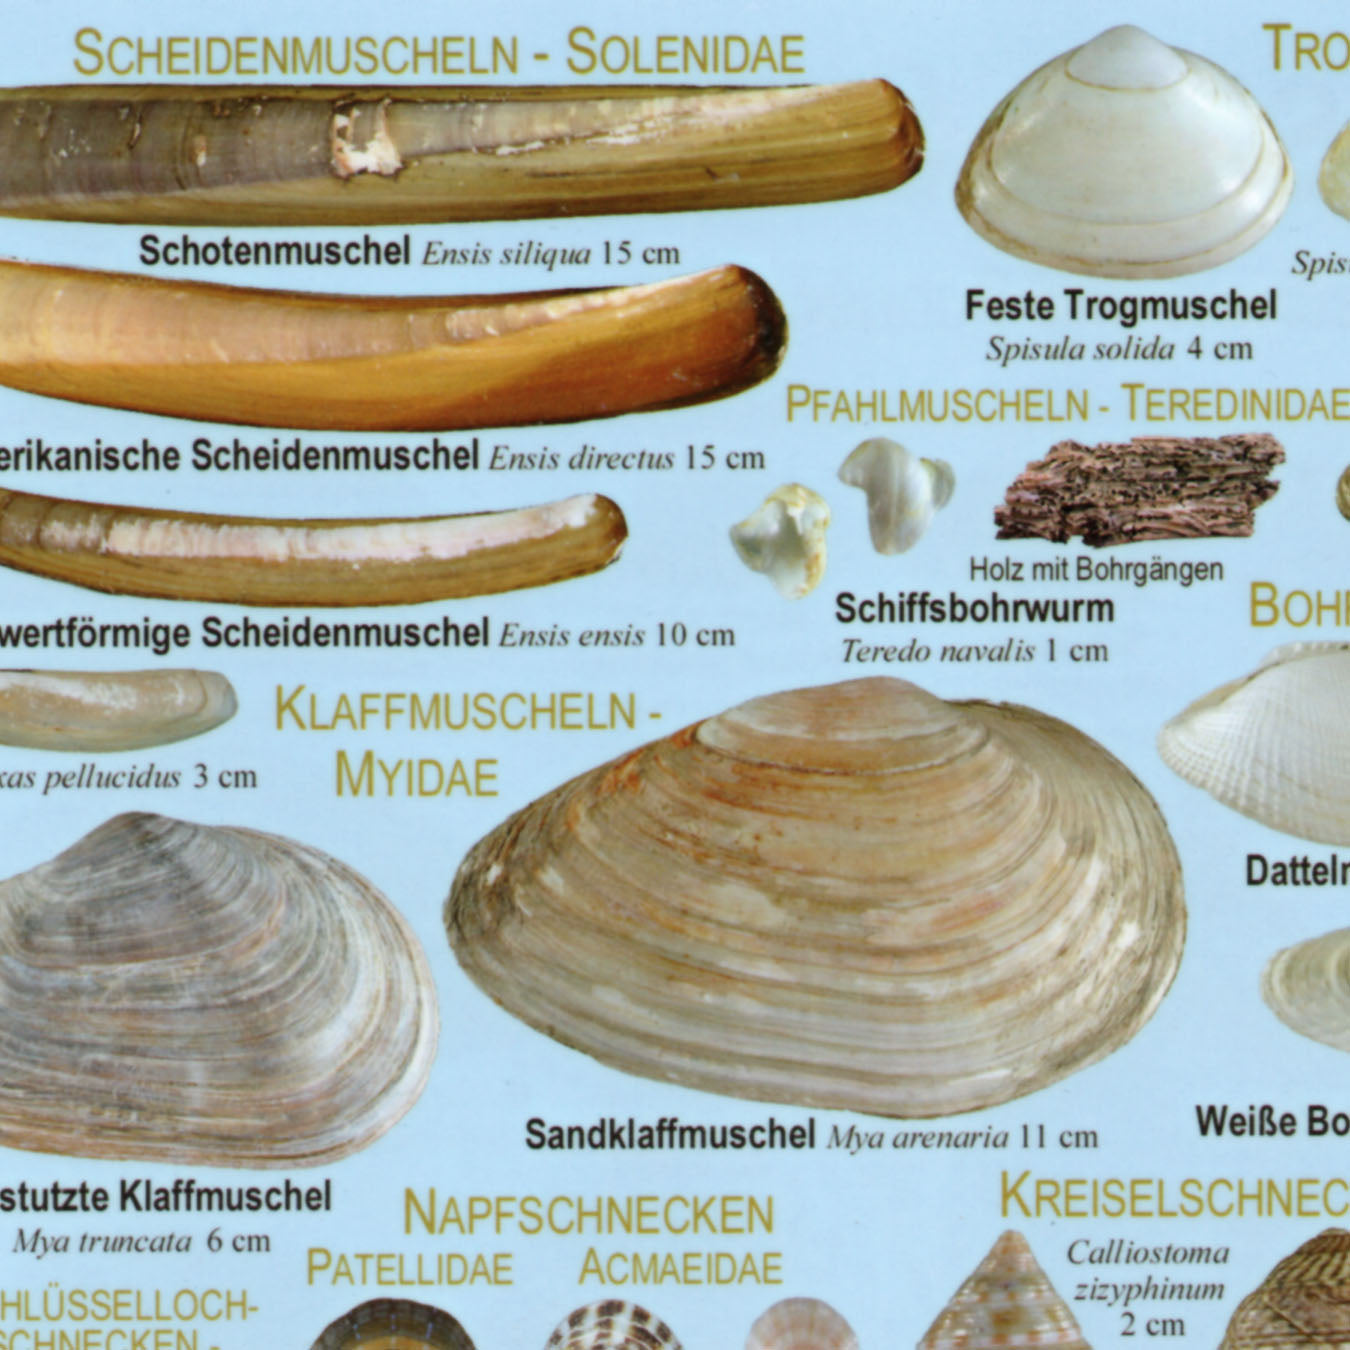 Chart "Nordsee-Strand"